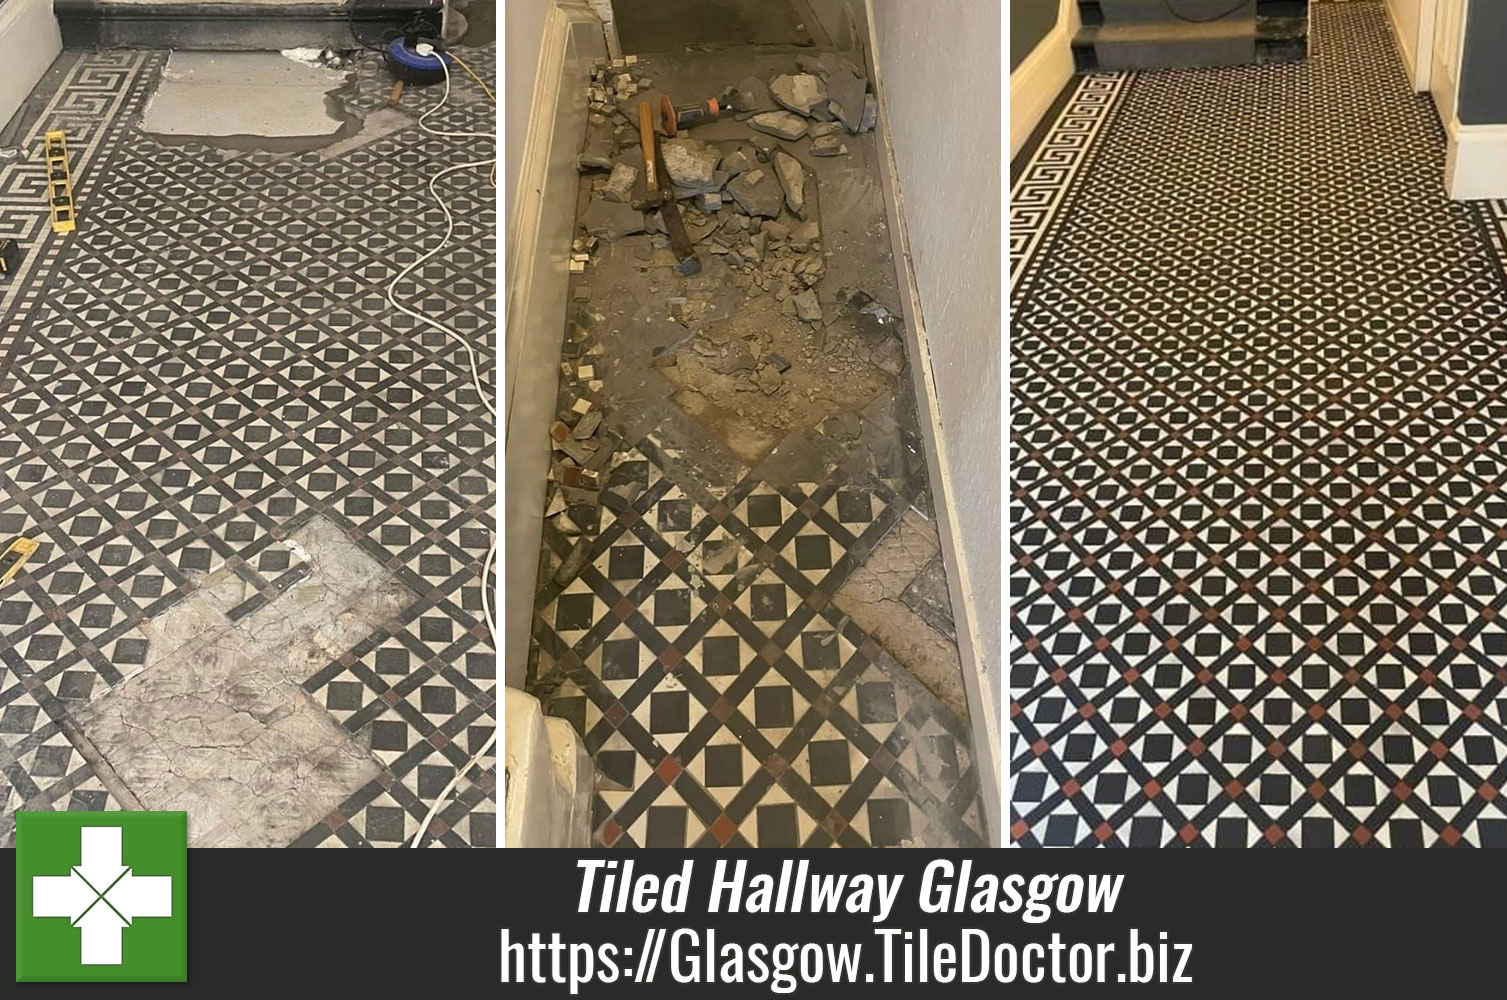 Using Tile Doctor Acid Gel for the Low Moisture Cleaning of Victorian Hallway Tiles in Glasgow